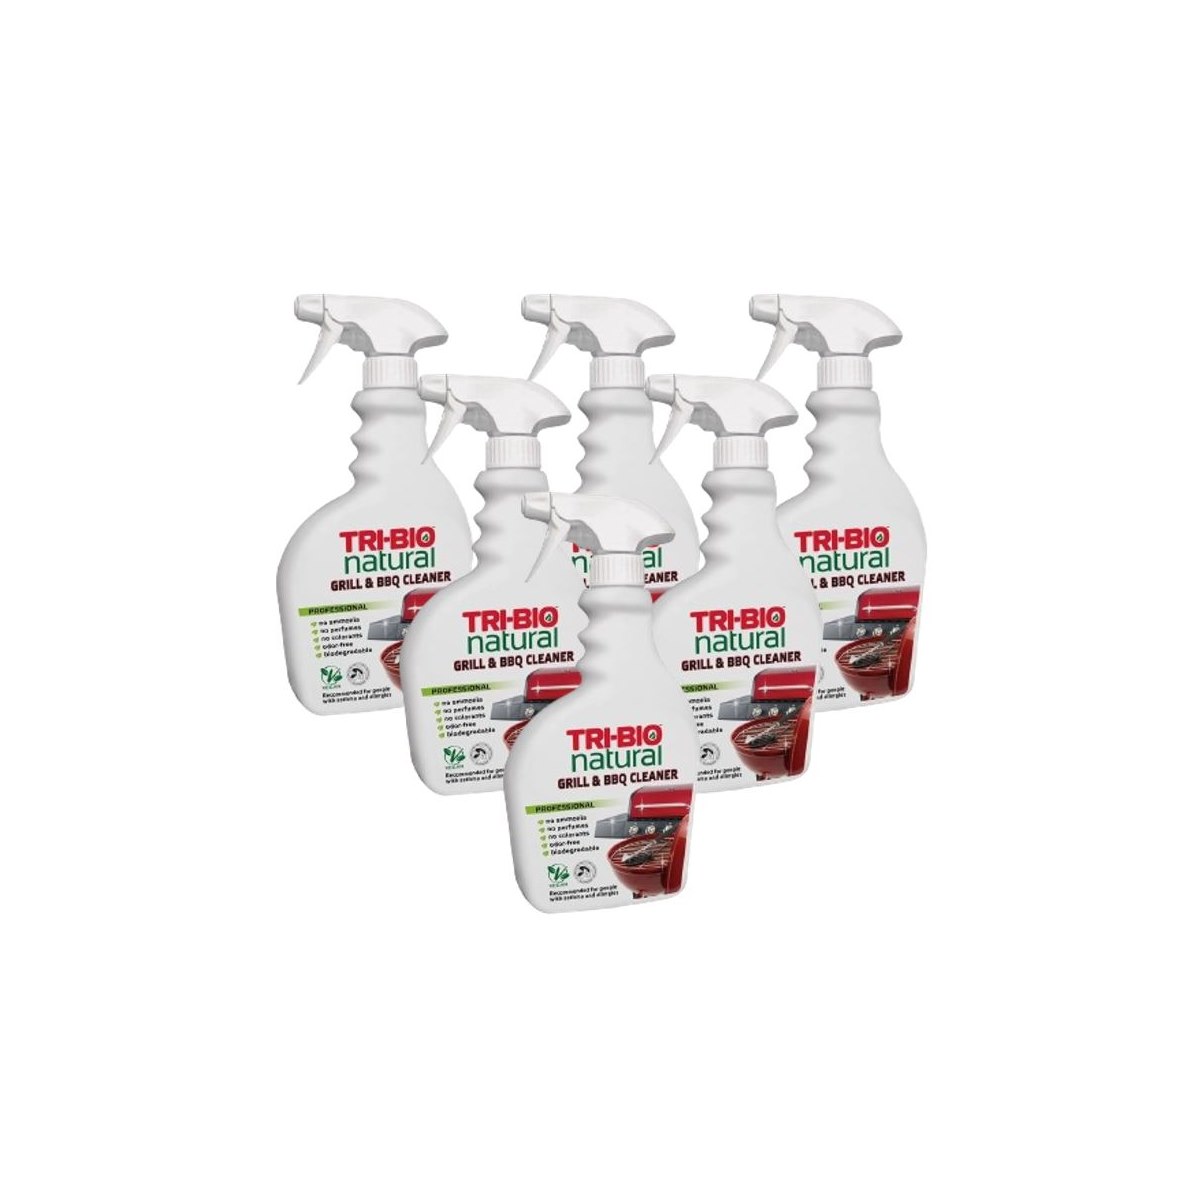 Case of 6 x Tri-Bio Eco Natural Grill and BBQ Cleaner Spray 420ml